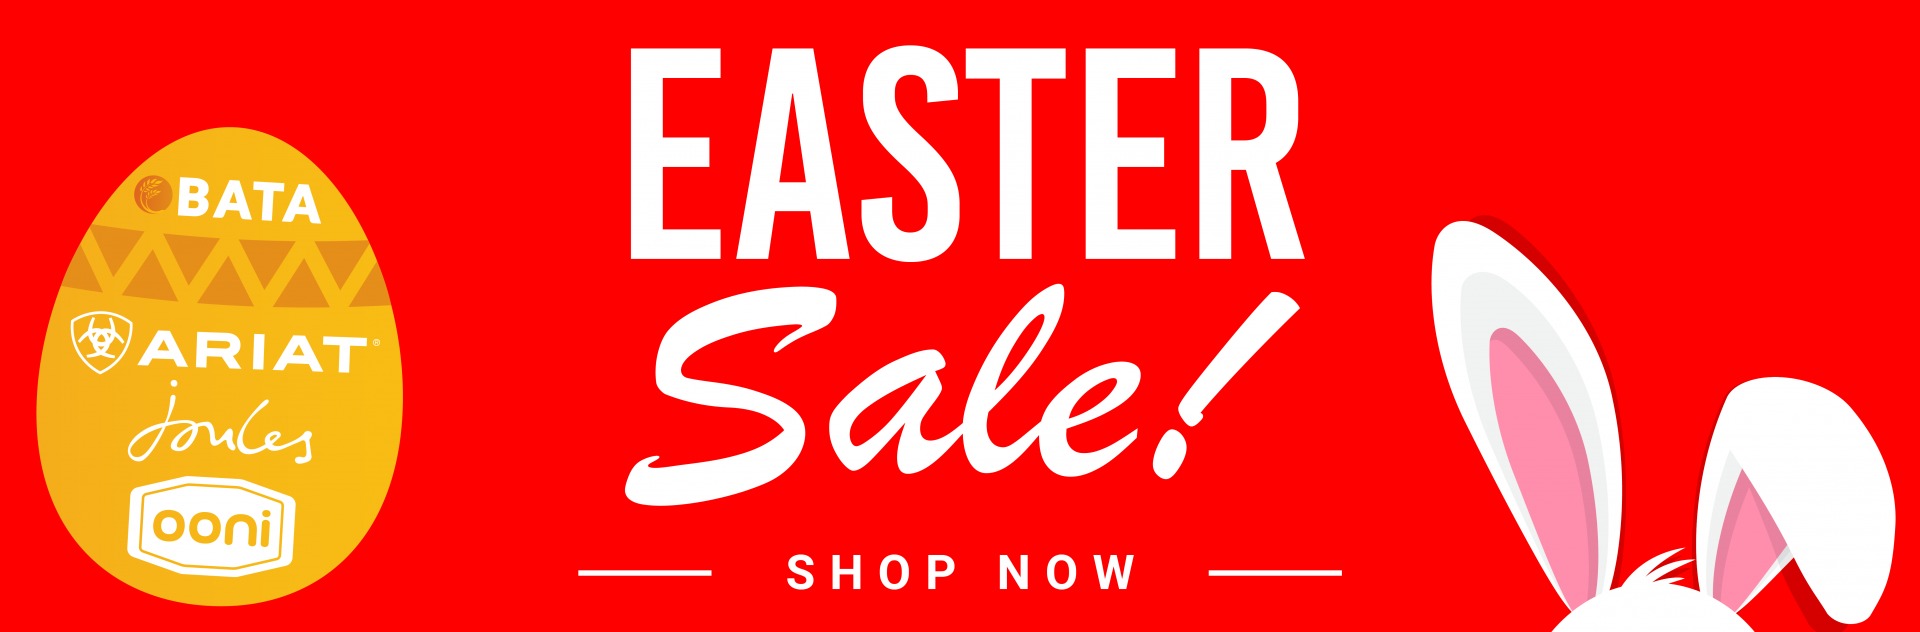 EASTER SALE NOW ON!